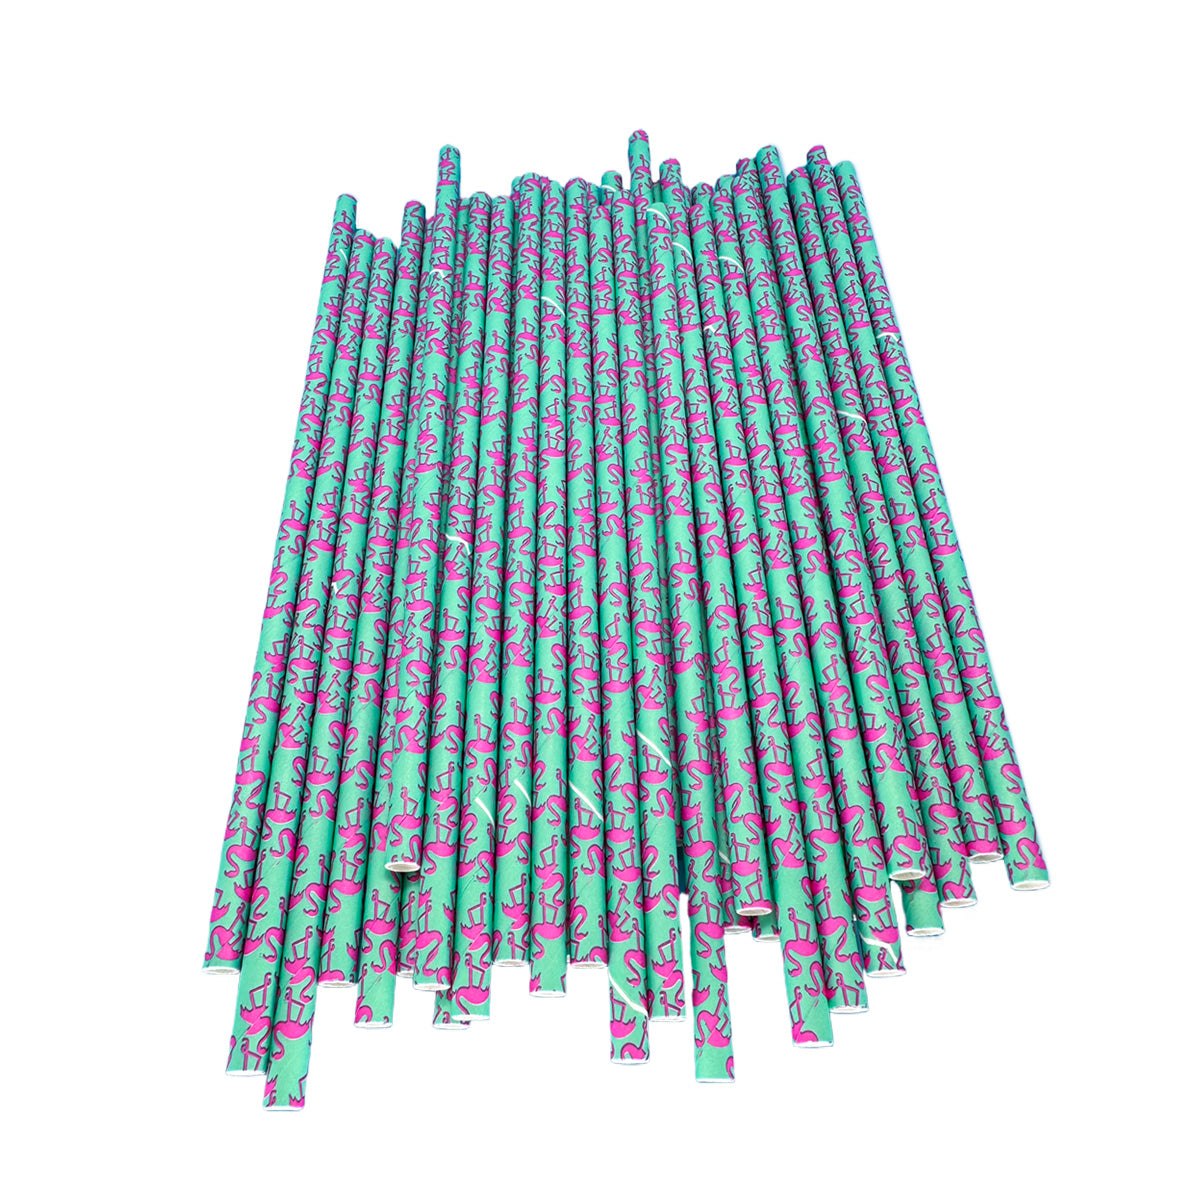 Smoothie Straws Wholesale Magic Pink Swan Paper Straws for Cold Drinks